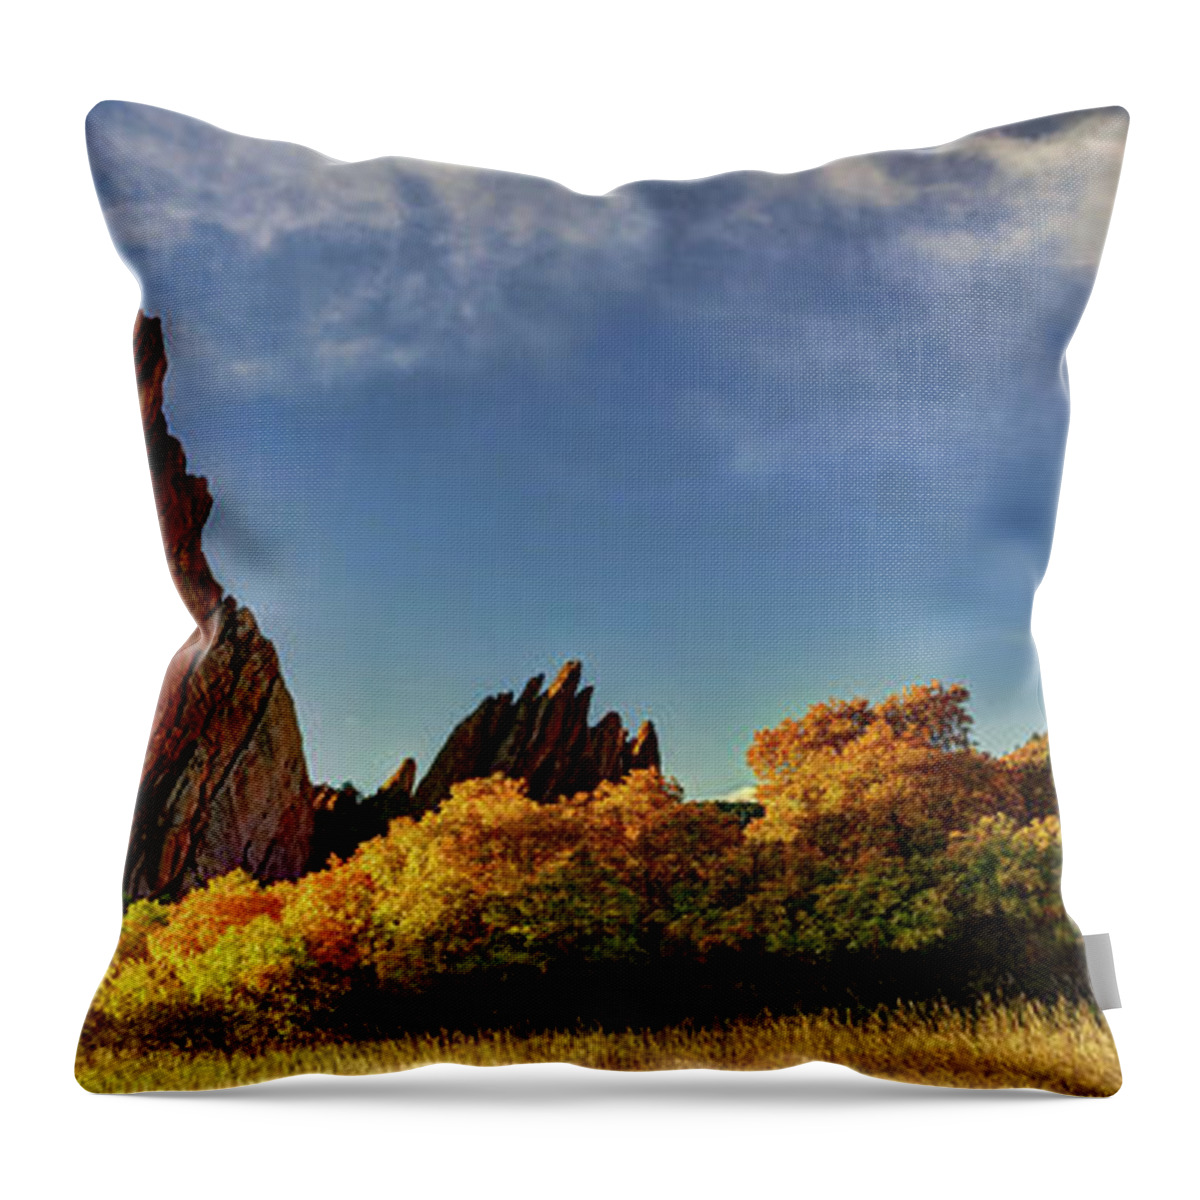 Lena-owens Throw Pillow featuring the digital art Red Rocks Panorama by Lena Owens - OLena Art Vibrant Palette Knife and Graphic Design